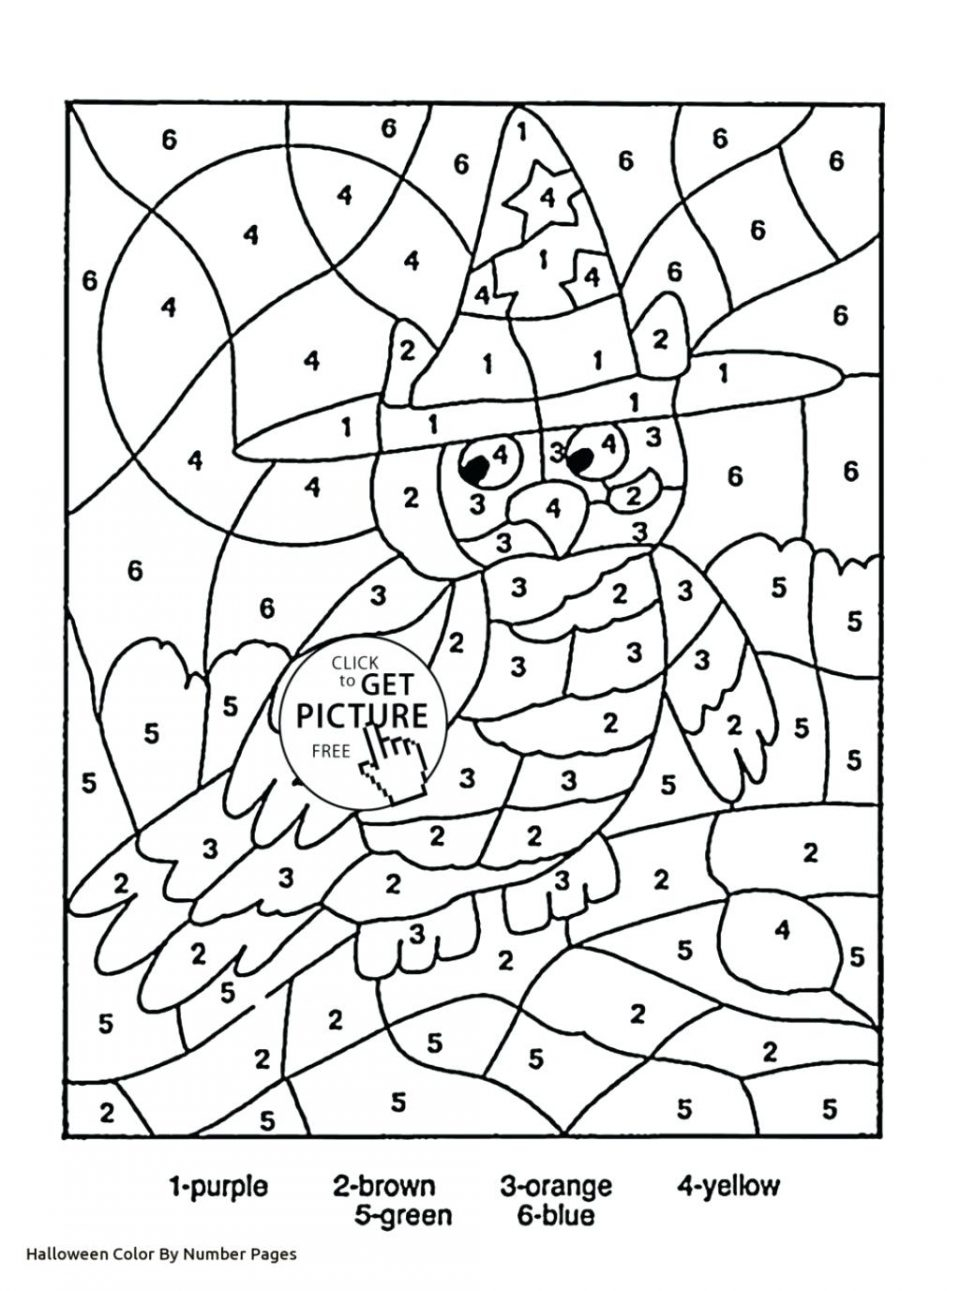 Mathheet B310423E49A61Dcd1093A38C03F9A050_Coloring Pages